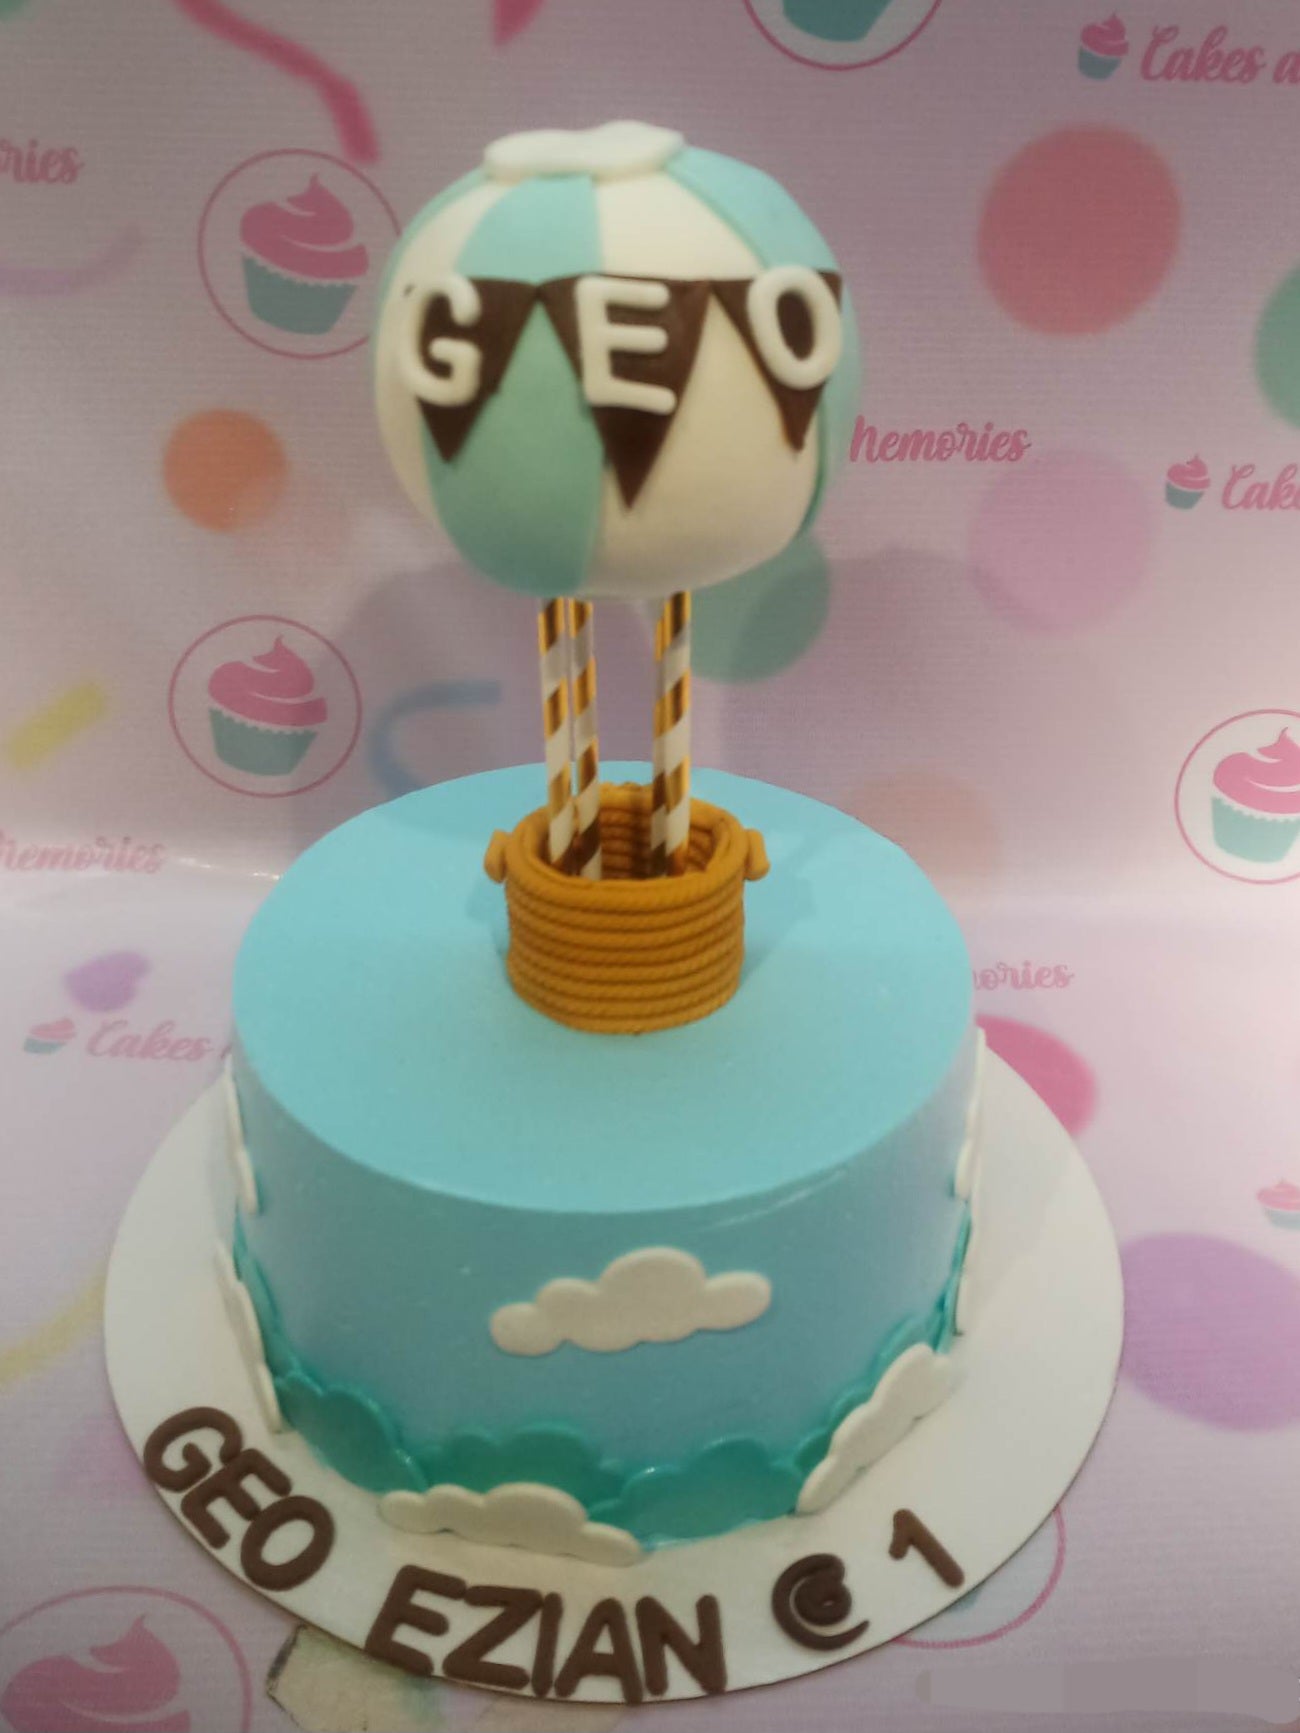 This Hot Air Balloon Cake is the perfect way to celebrate a special occasion! Decorated in shades of blue, white, and sky, with clouds and dolls in hot pink and purple, this is a beautiful and unique cake. Perfect for baptisms, birthday parties, and christenings, this customized hot air balloon cake will be the standout of the event!